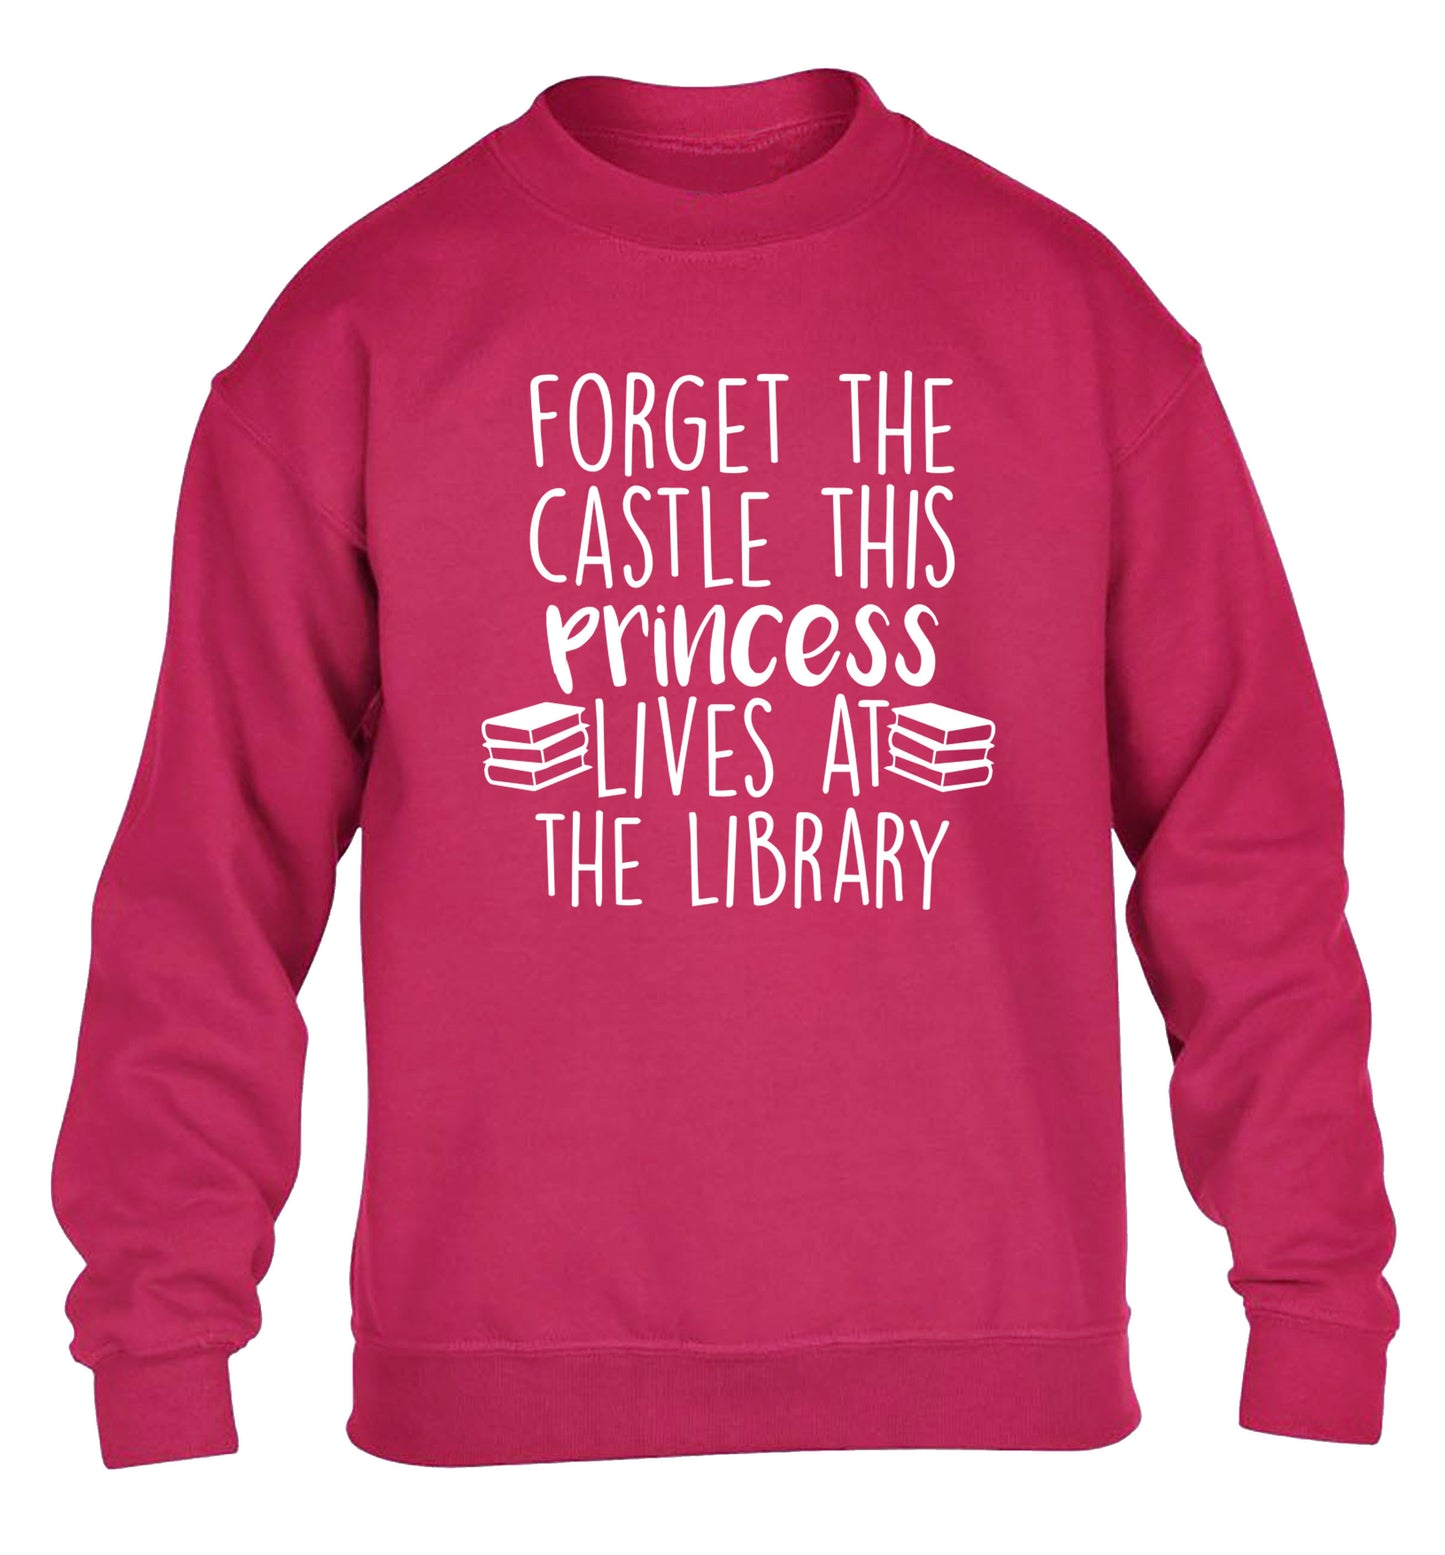 Forget the castle this princess lives at the library children's pink sweater 12-14 Years